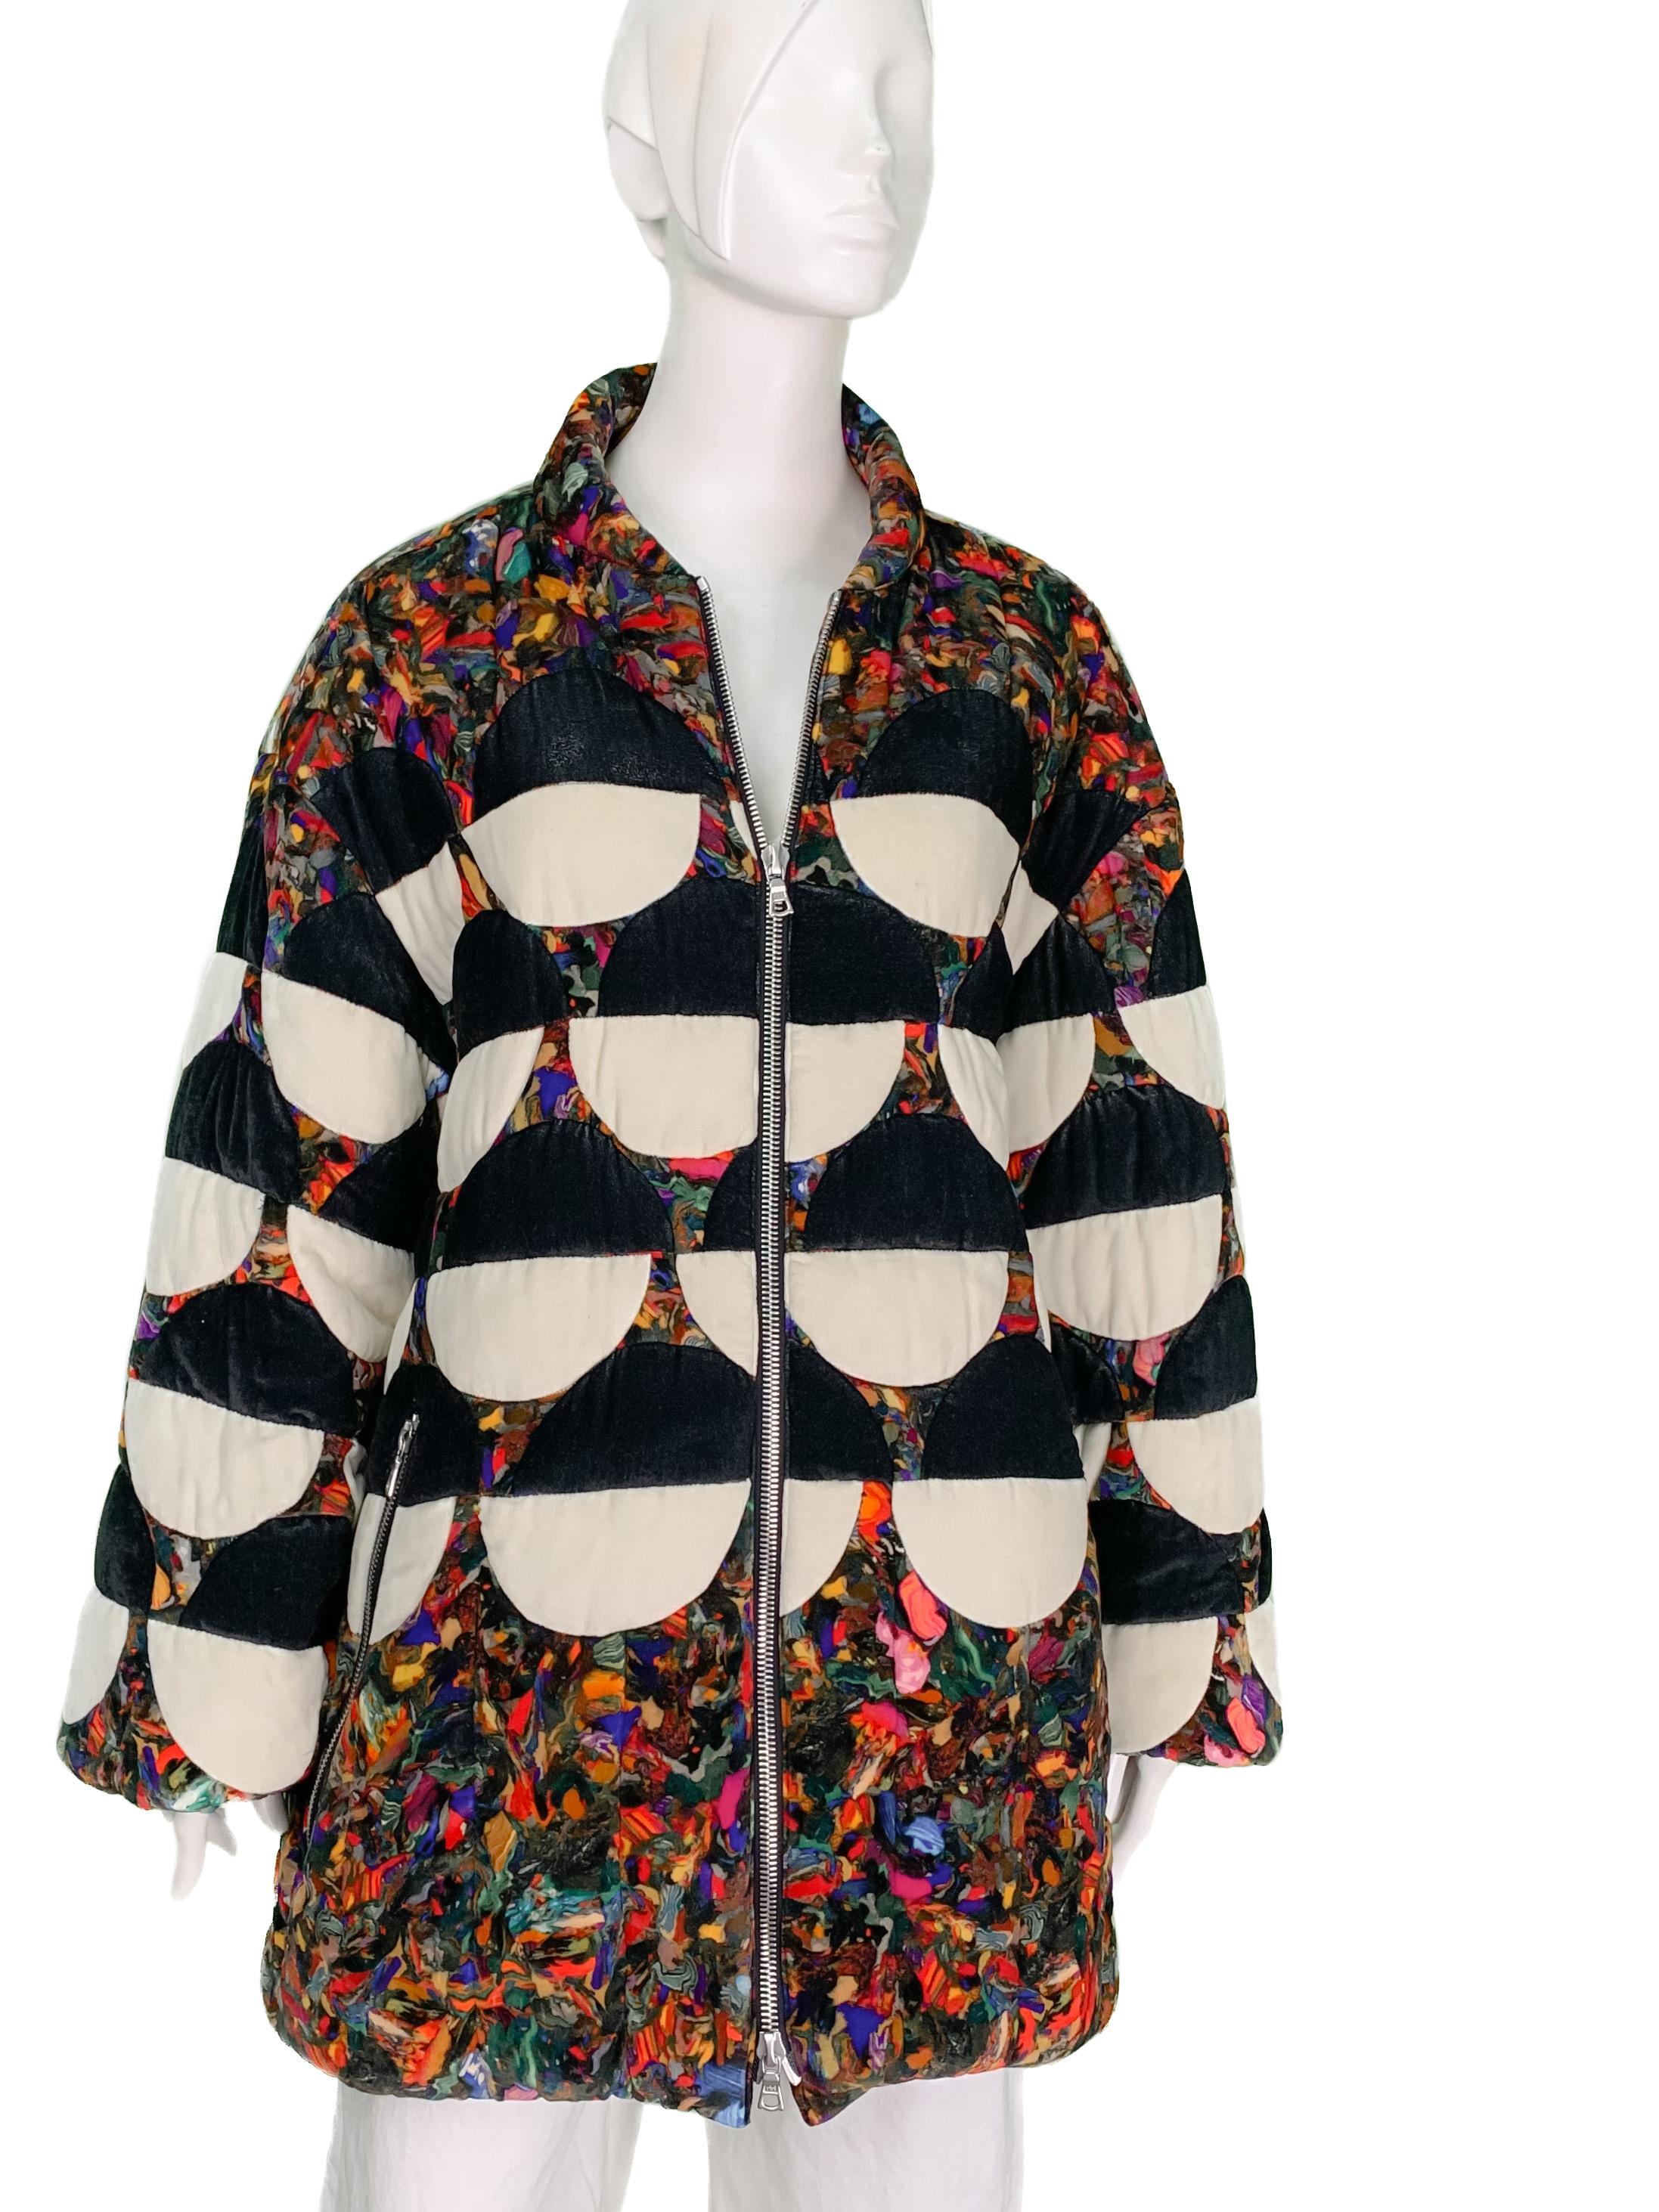 Dries Van Noten Autumn/Winter 2017 oversized quilted bomber jacket in viscose & silk velvet with multicolor mosaic abstract print and contrasting black and white circles in relief.
Condition 9/10: excellent.
Size Medium, generously oversized so fits